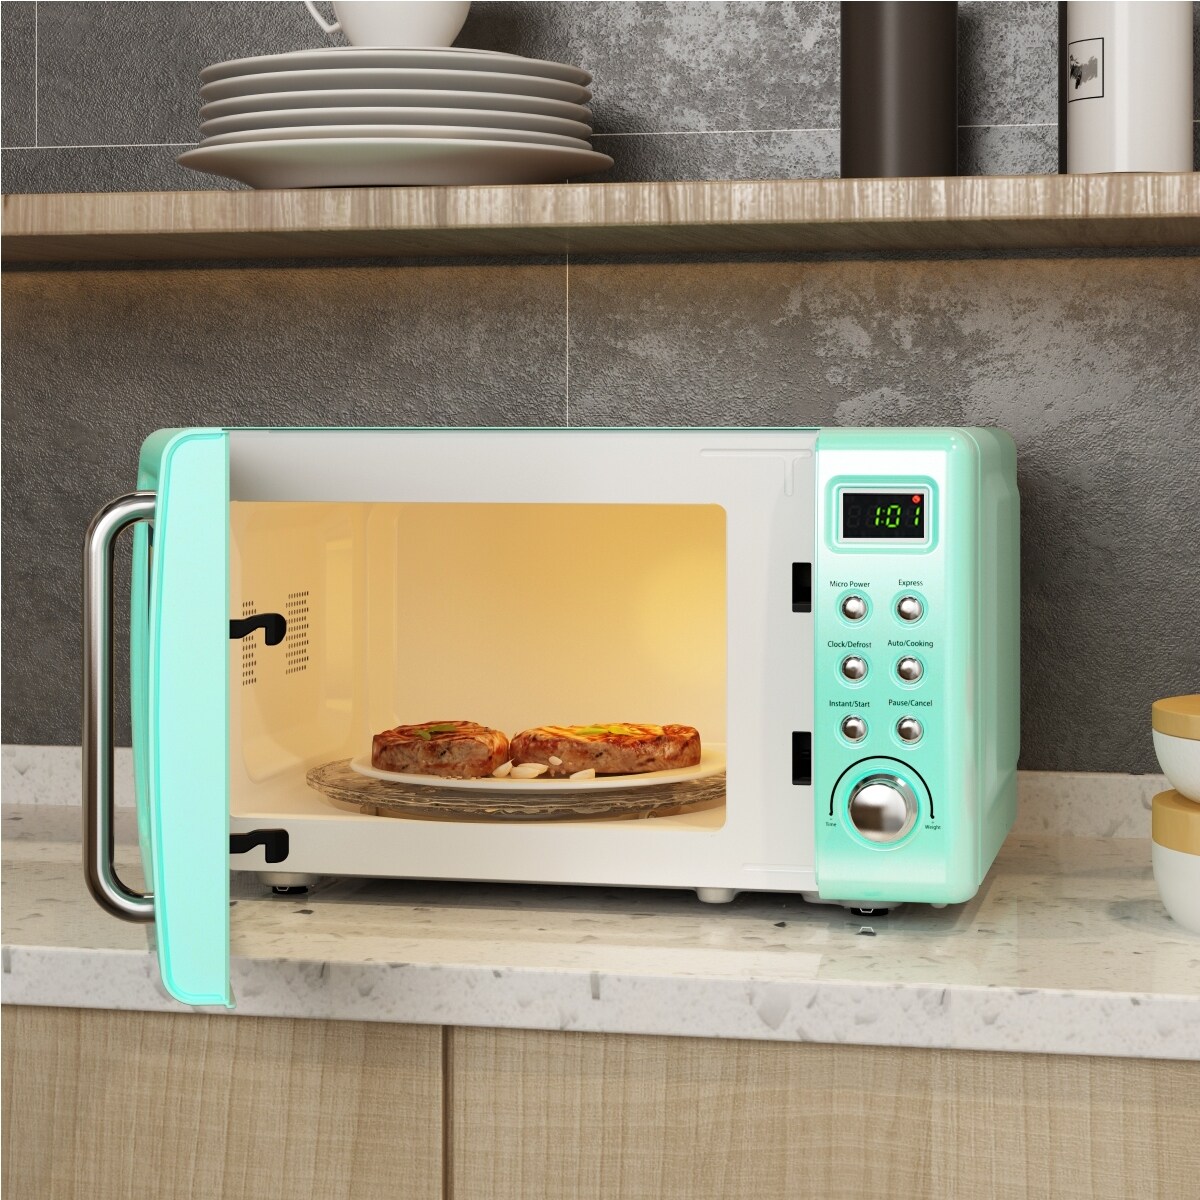 Costway 0.7Cu.ft Retro Countertop Microwave Oven 700W LED Display - On Sale  - Bed Bath & Beyond - 29548773